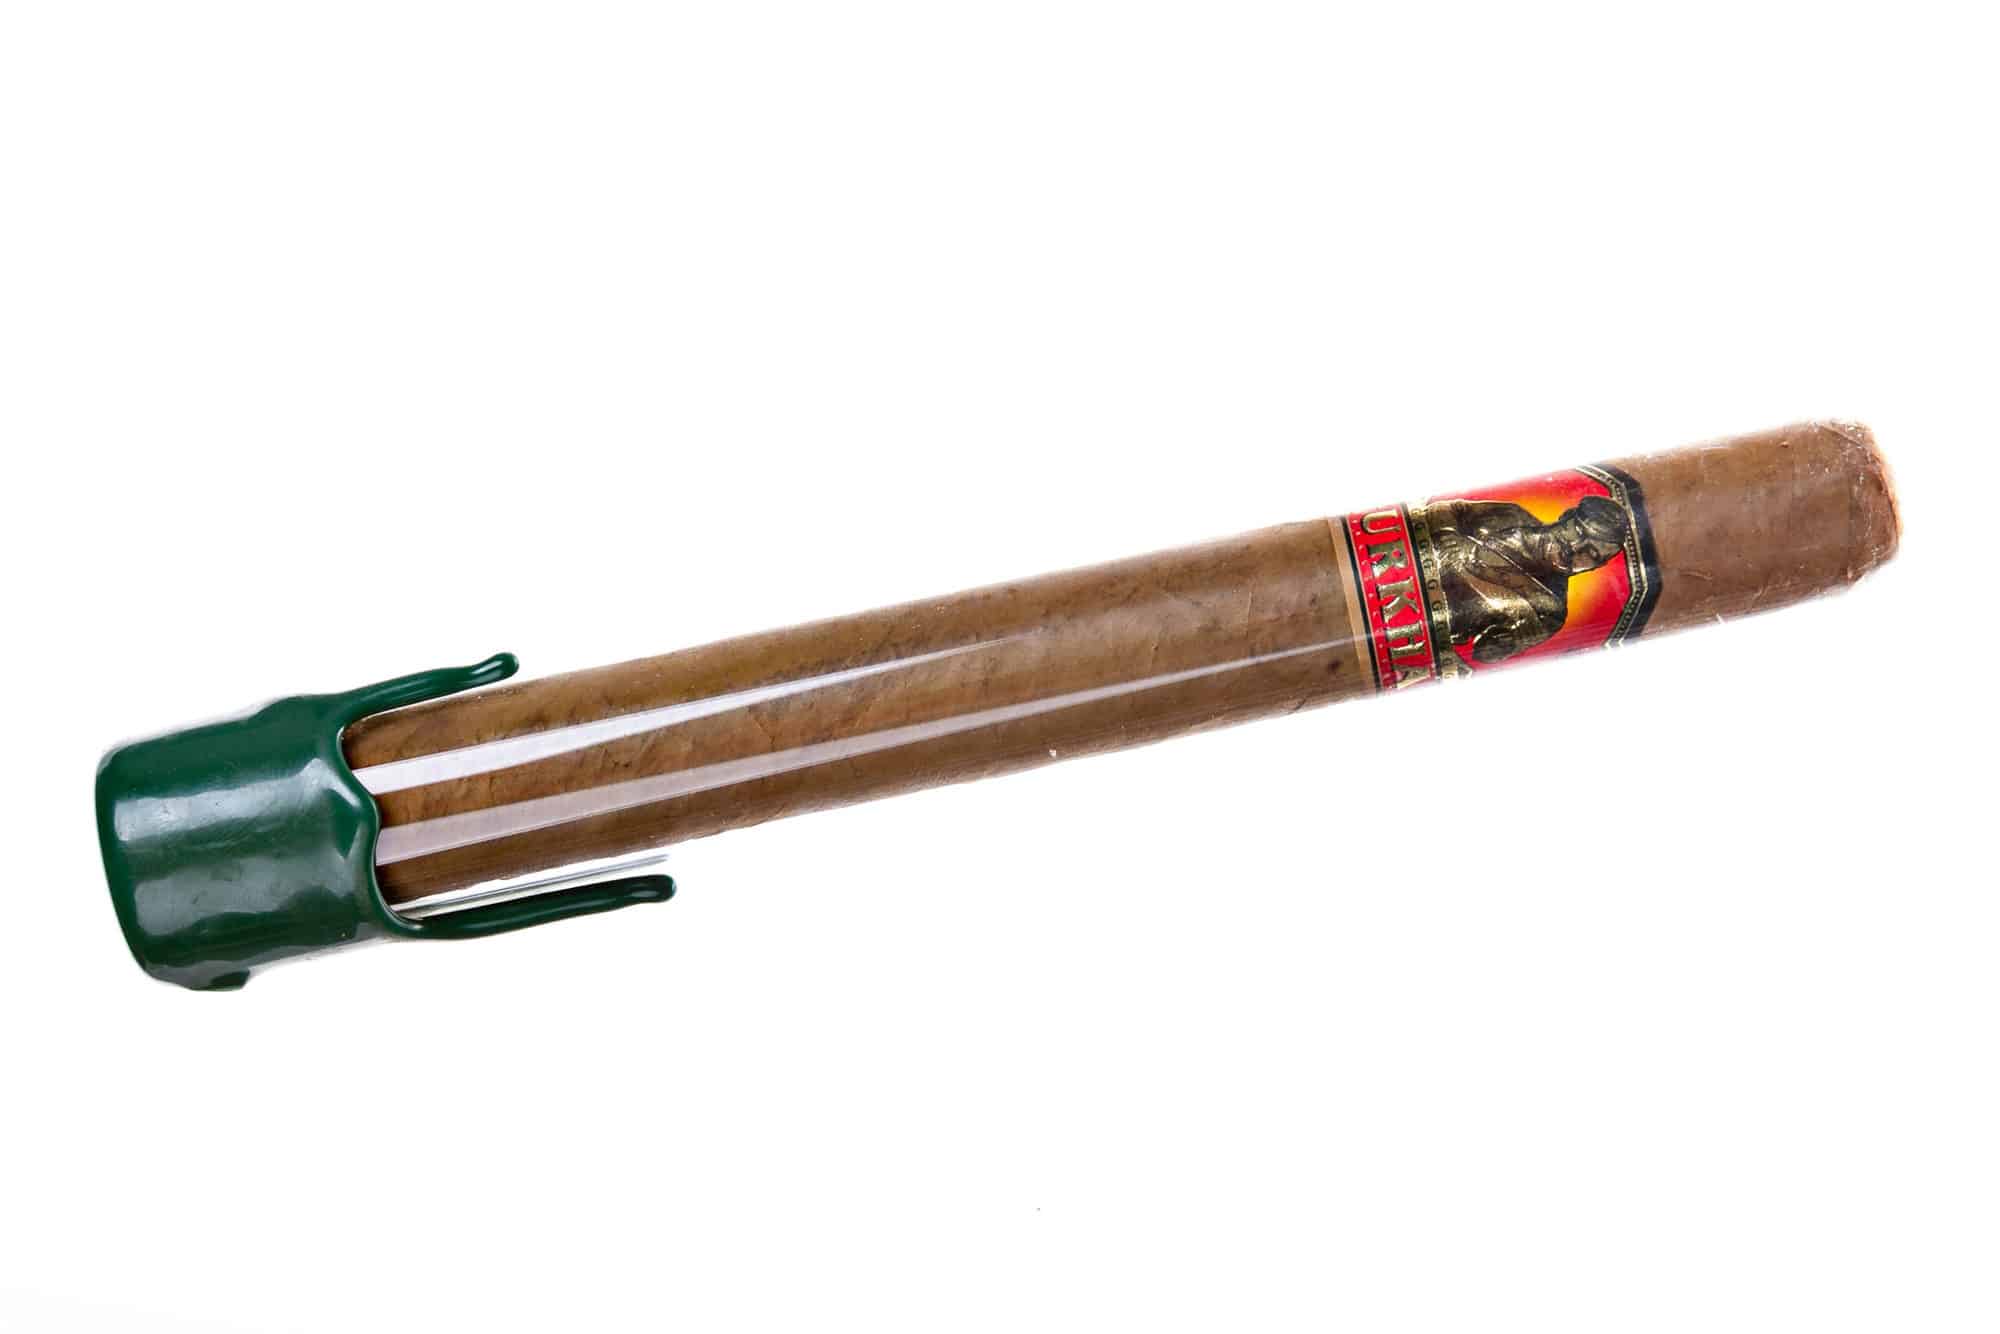 Most Expensive Cigars - Gurkha His Majesty’s Reserve - $750:Cigar